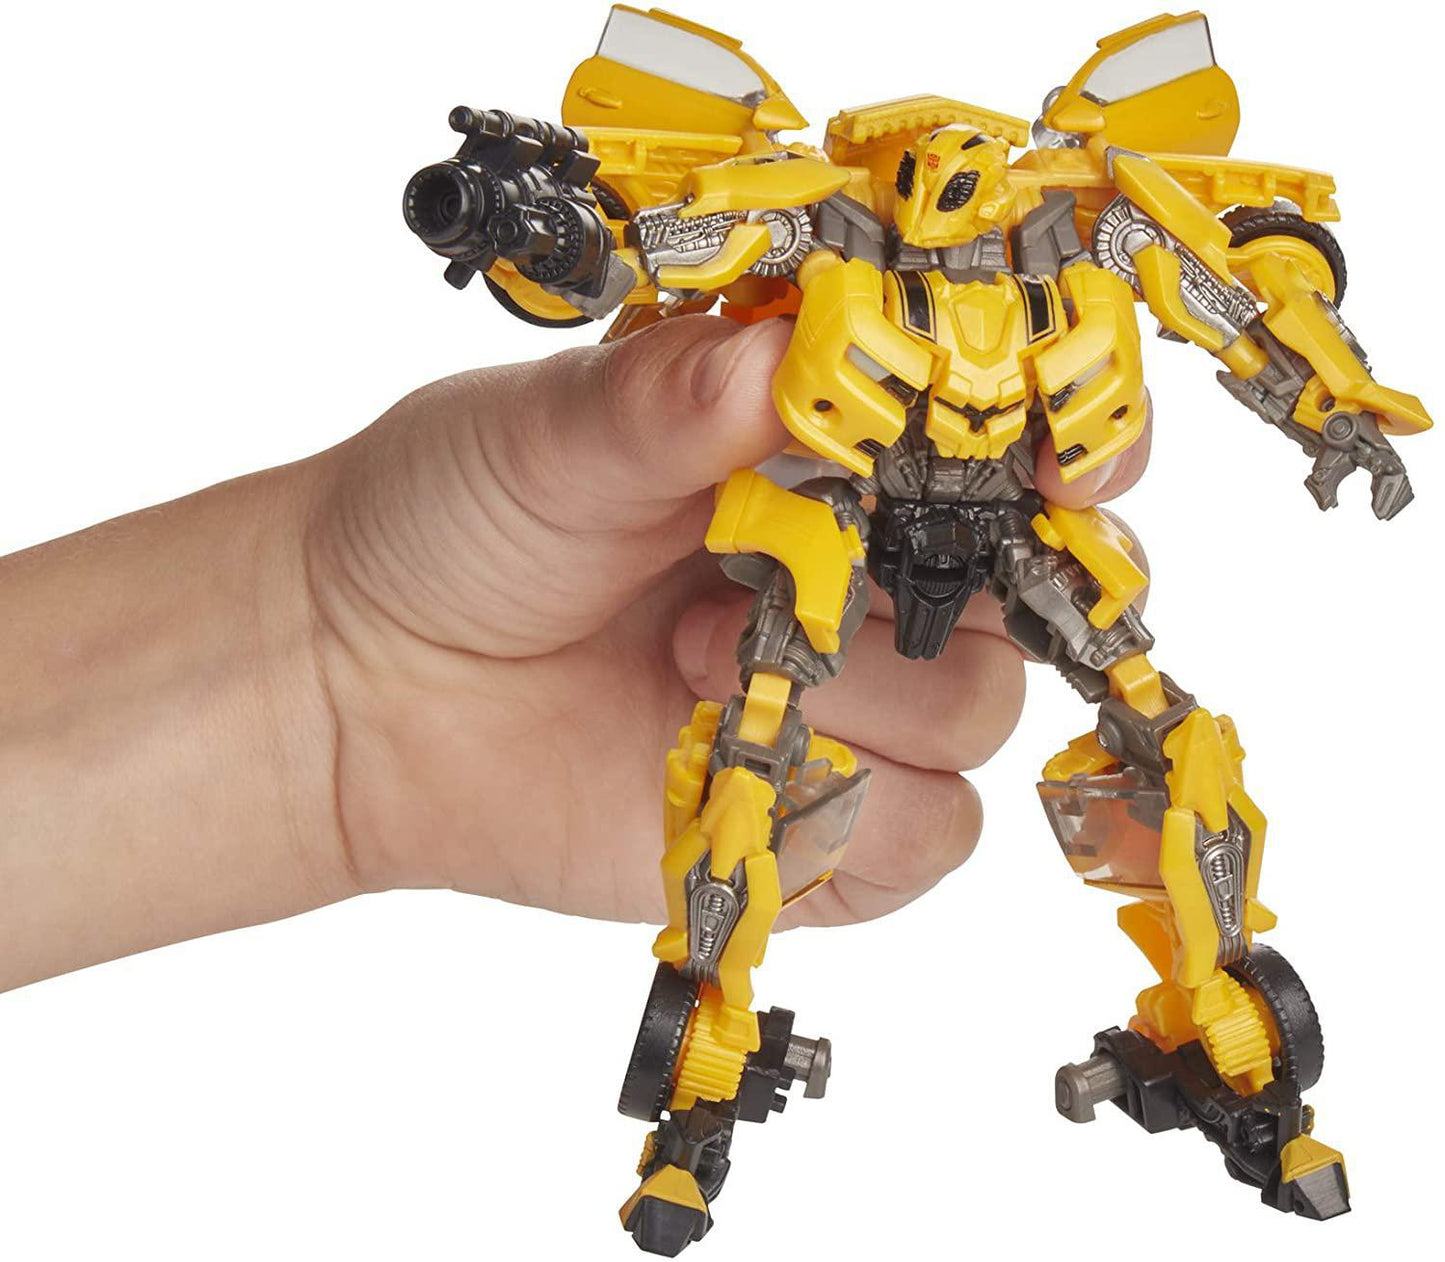 Transformers Toys Studio Series 49 Deluxe Class Movie 1 Bumblebee Action Figure - Kids Ages 8 & Up, 4.5"